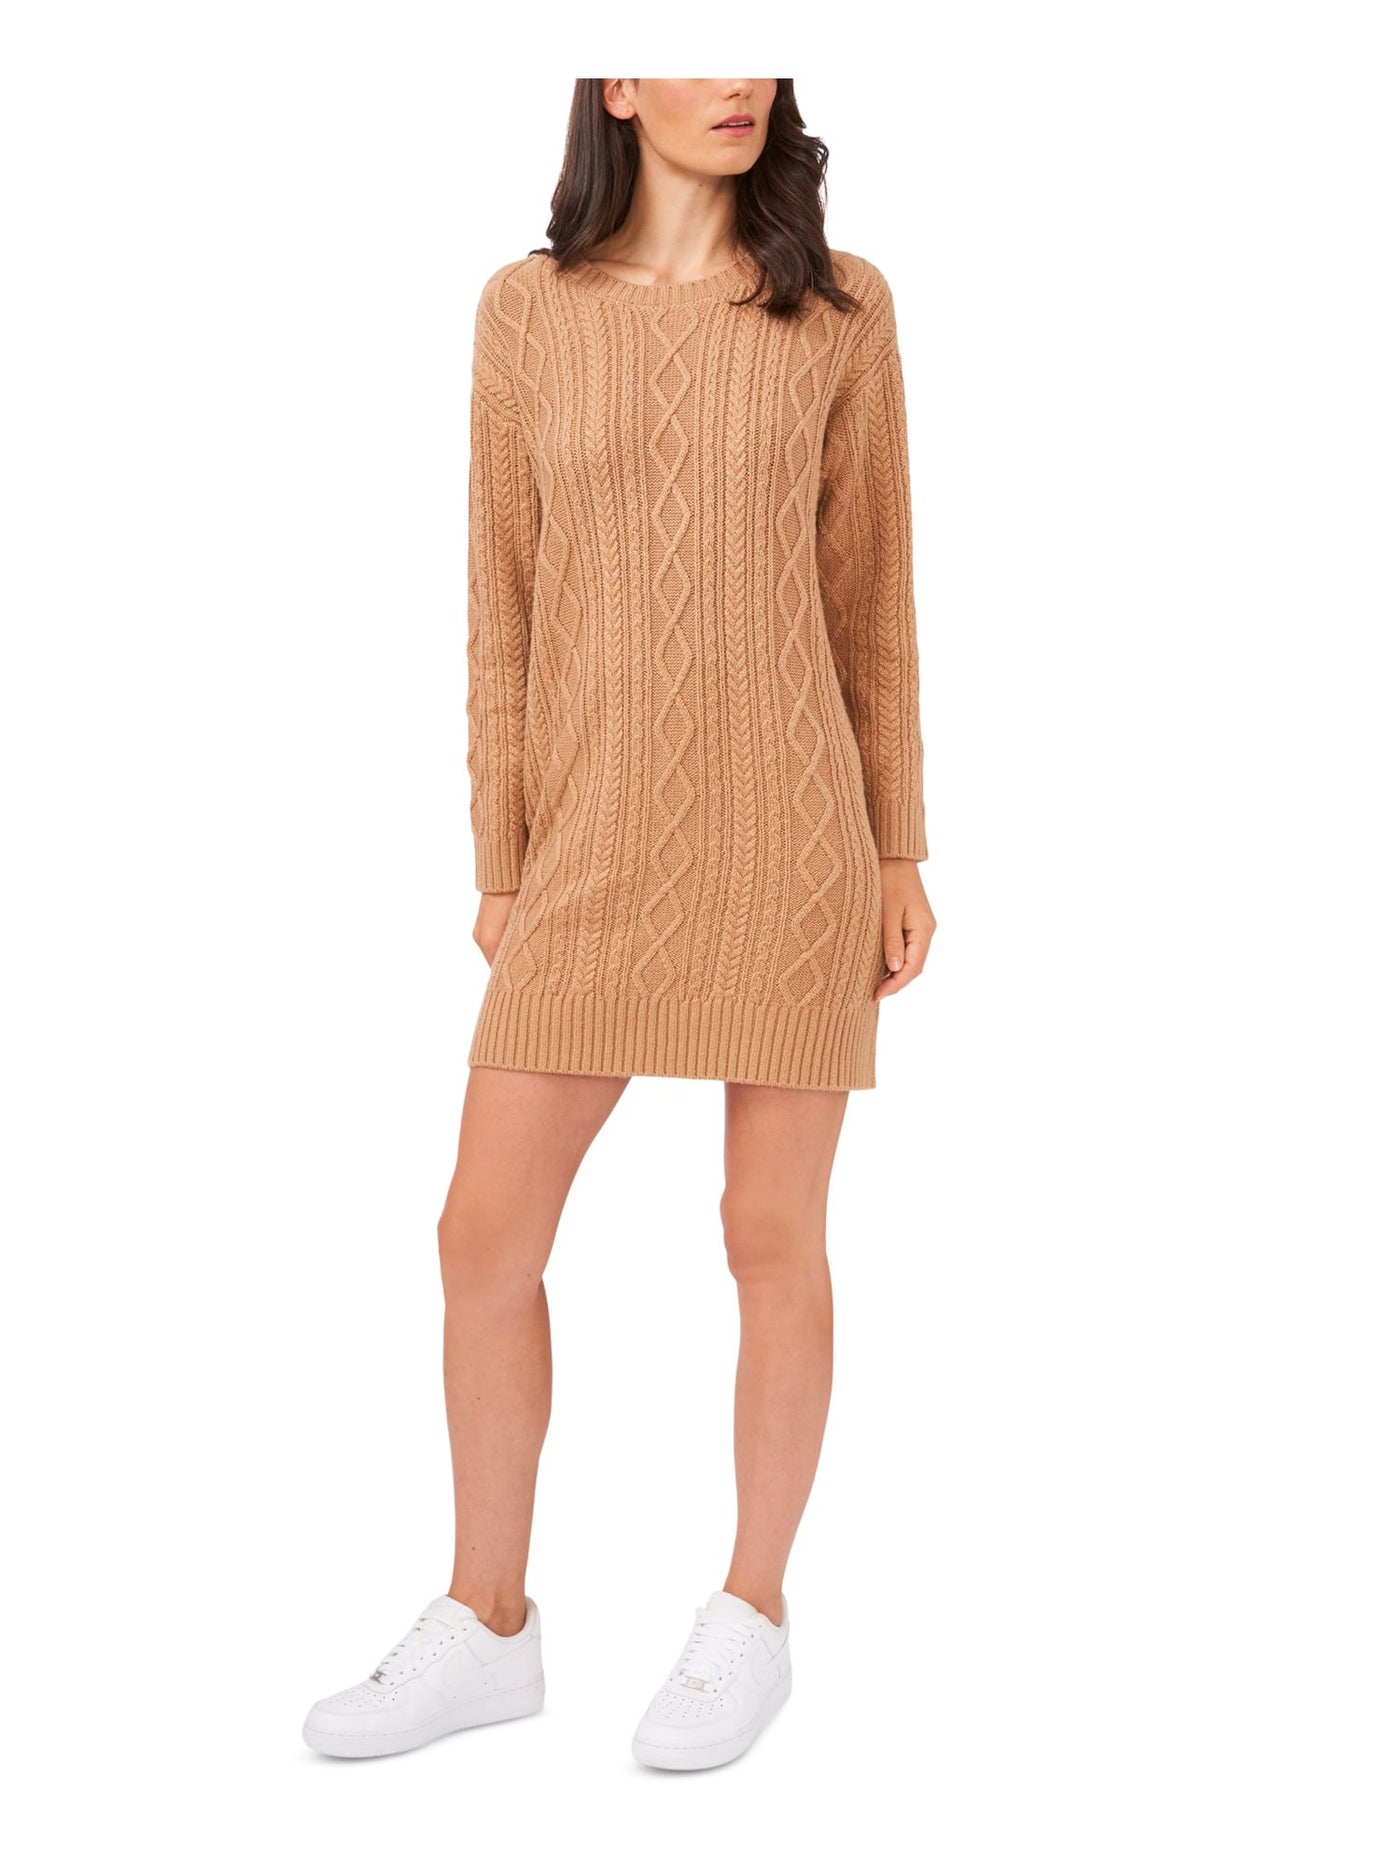 RILEY&RAE Womens Brown Unlined Sheer Pullover Ribbed Trim Long Sleeve Crew Neck Short Sweater Dress S